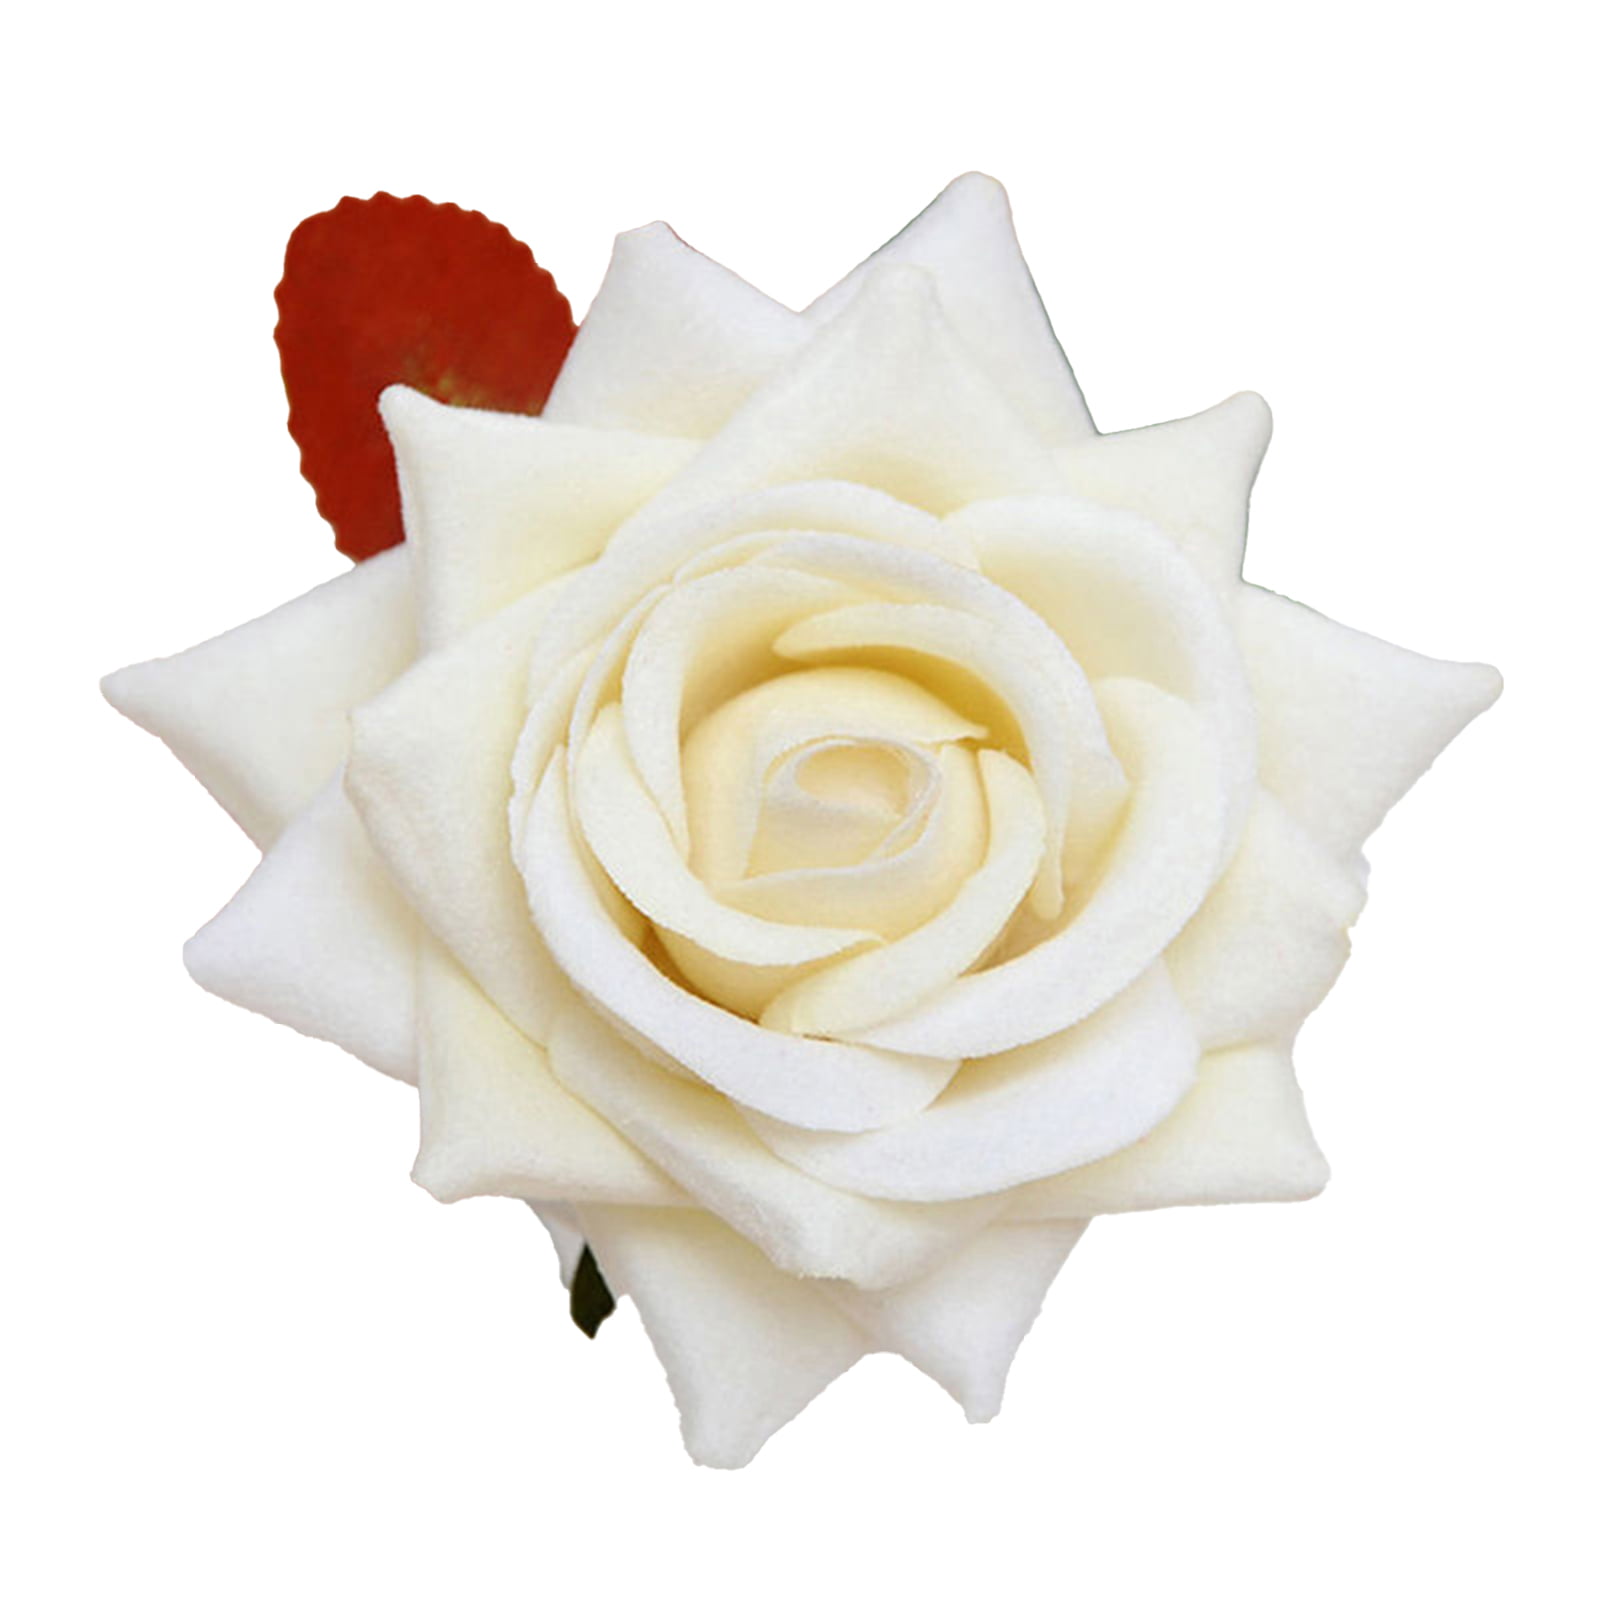 Details about   Artificial Flowers Fake Rose for Home Decor Valentine's Day Gift Wedding Bouquet 